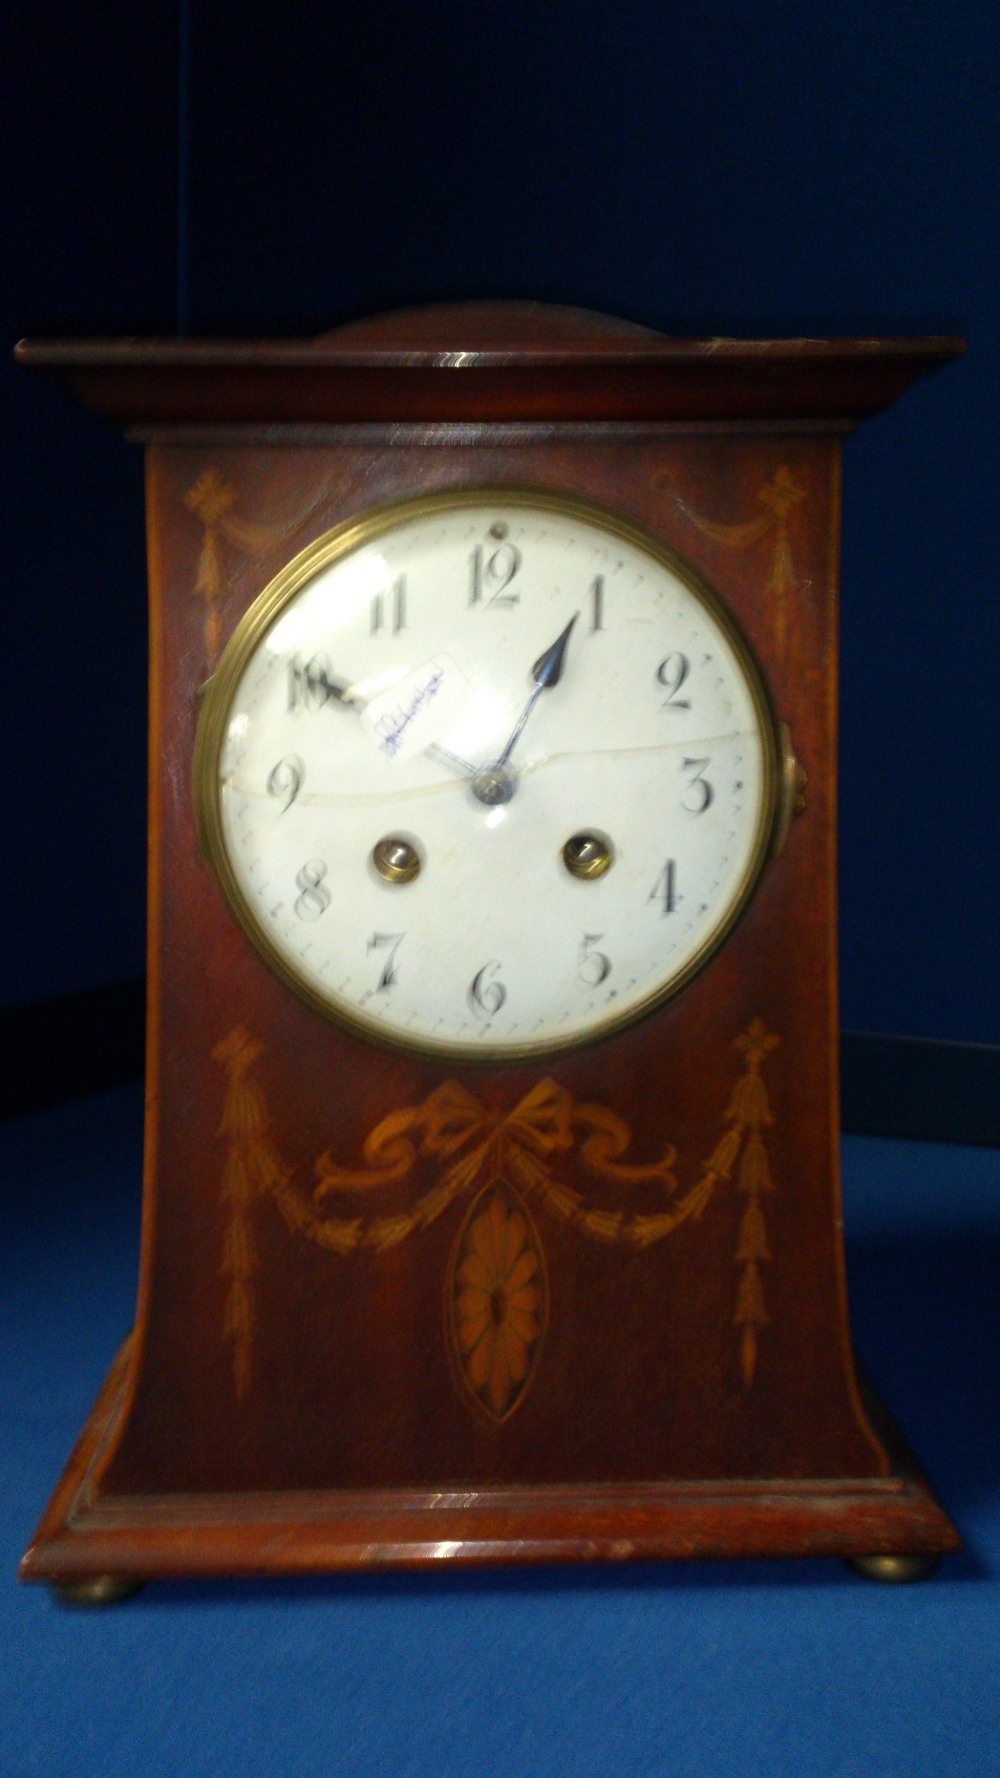 An Edwardian and inlaid mantle clock